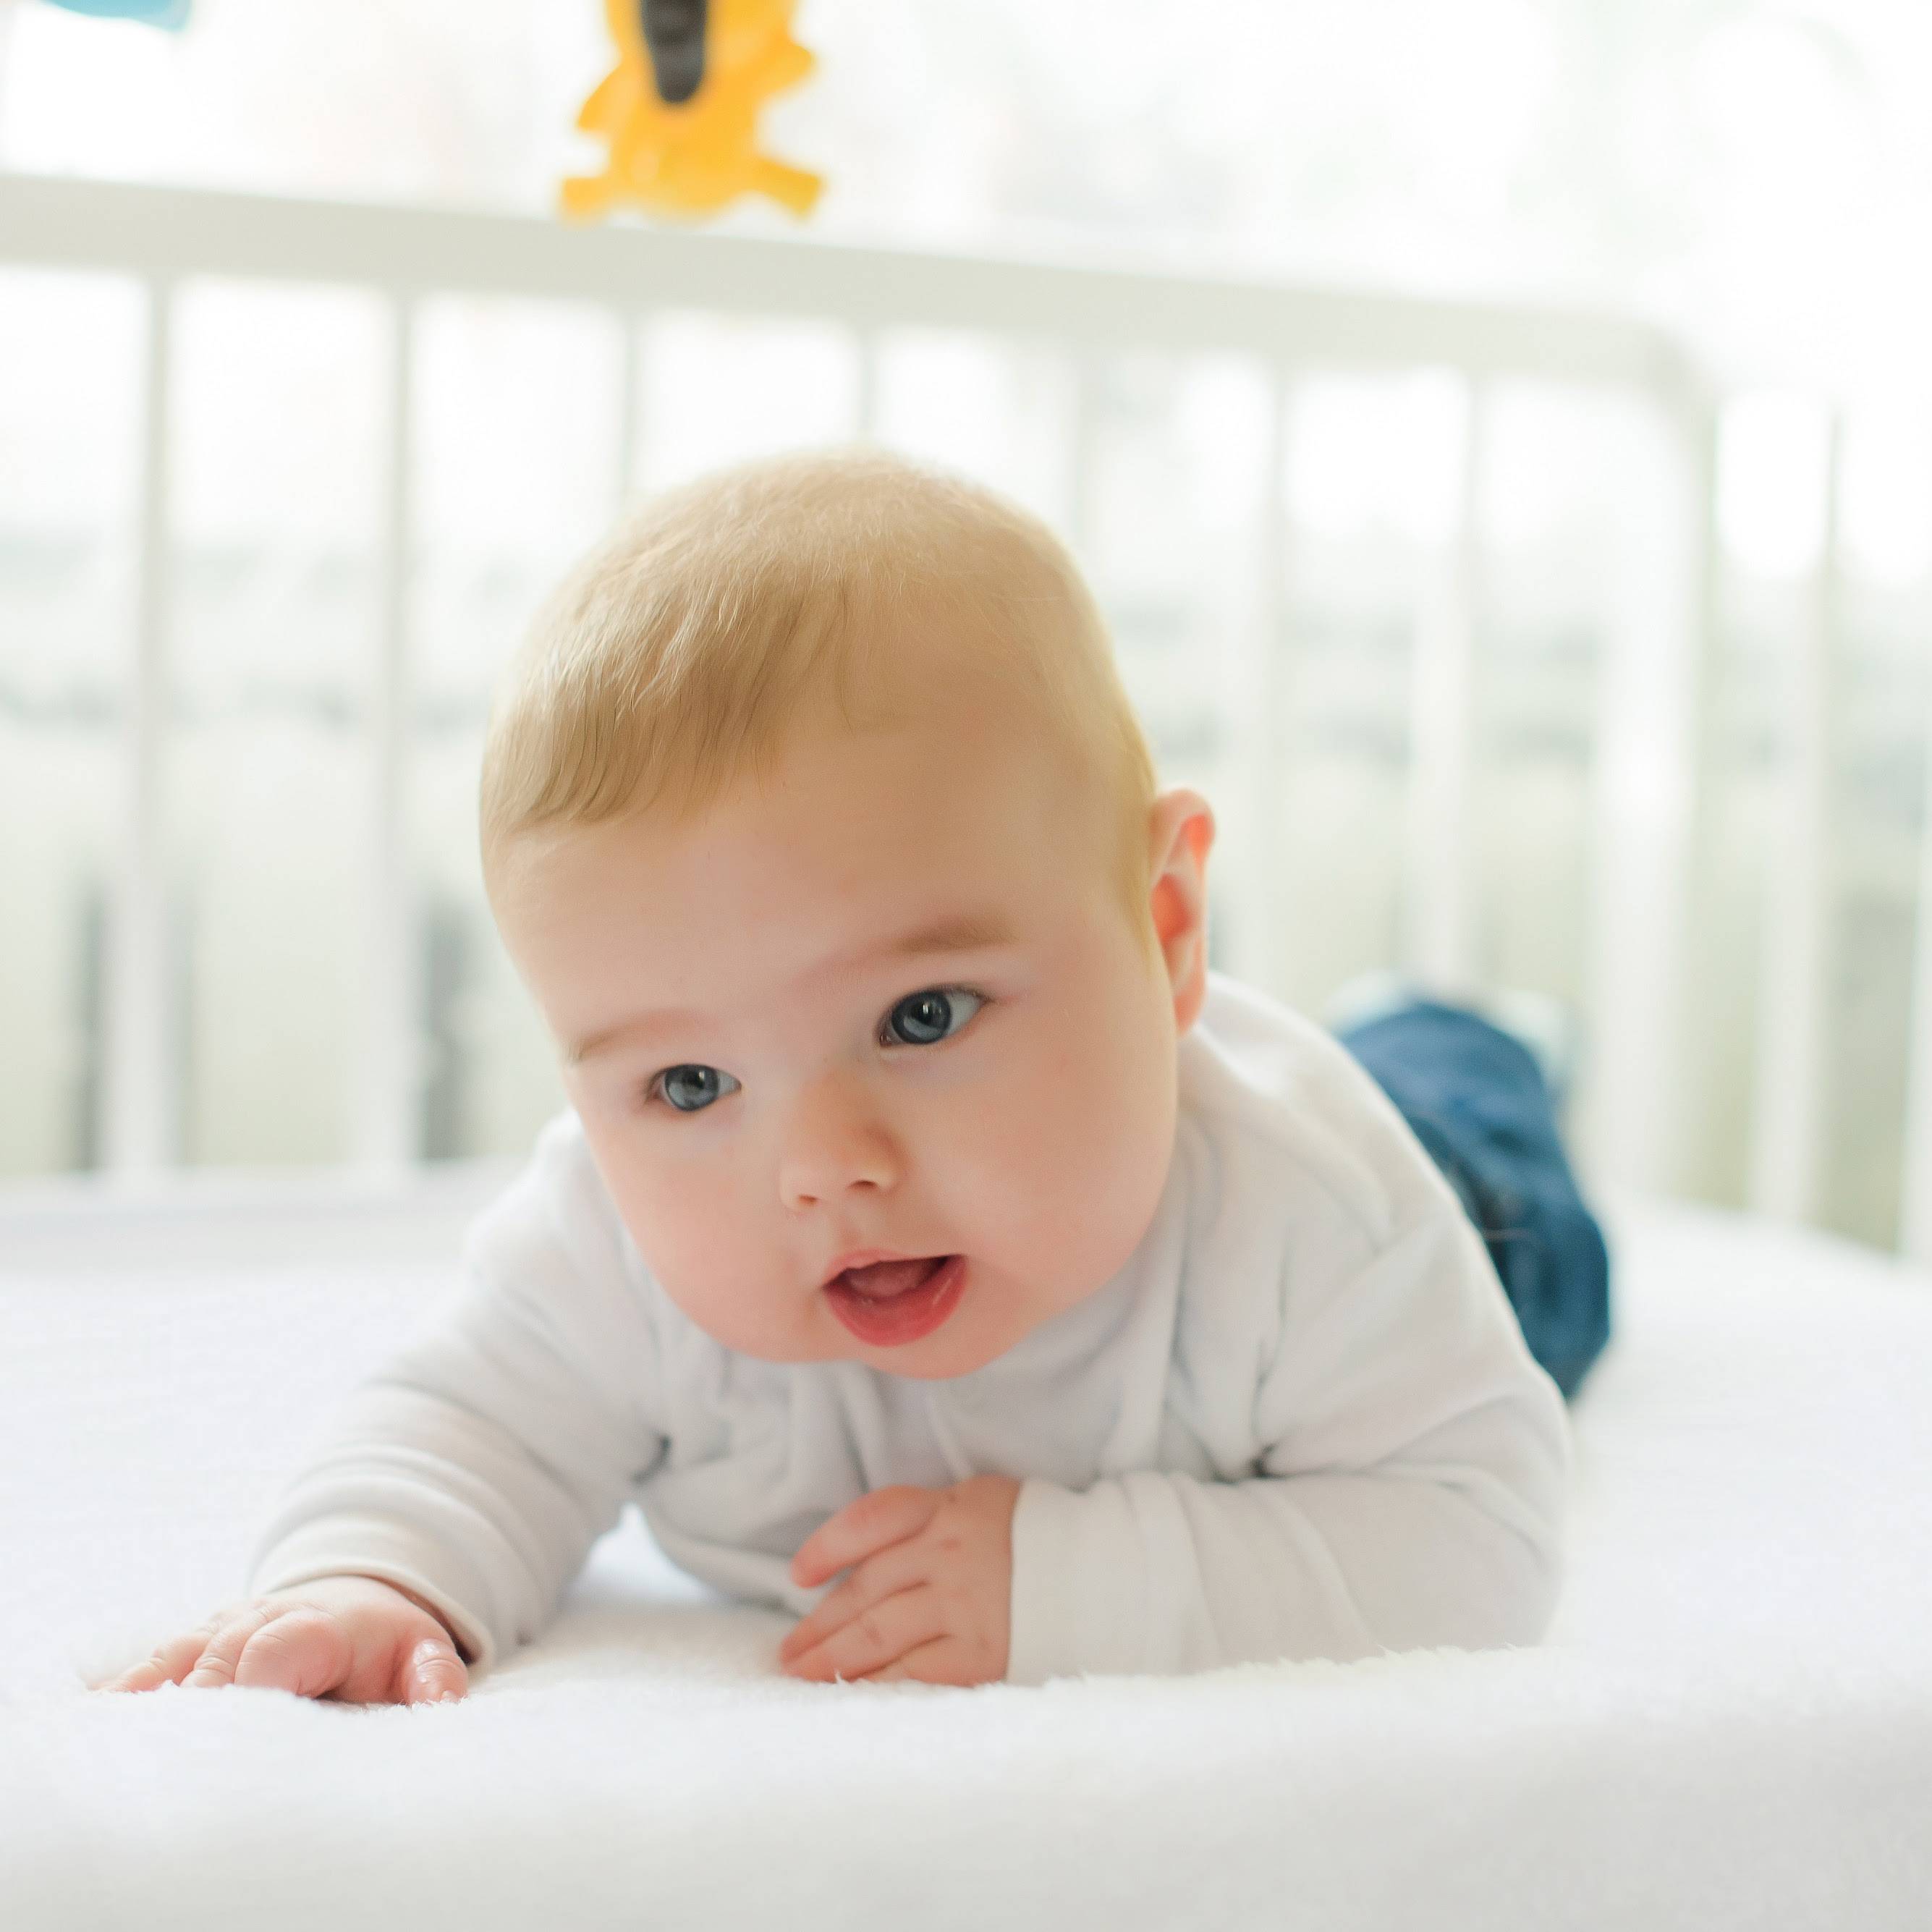 Baby boy lifting head on a comfortablly soft and breathable crib mattress.